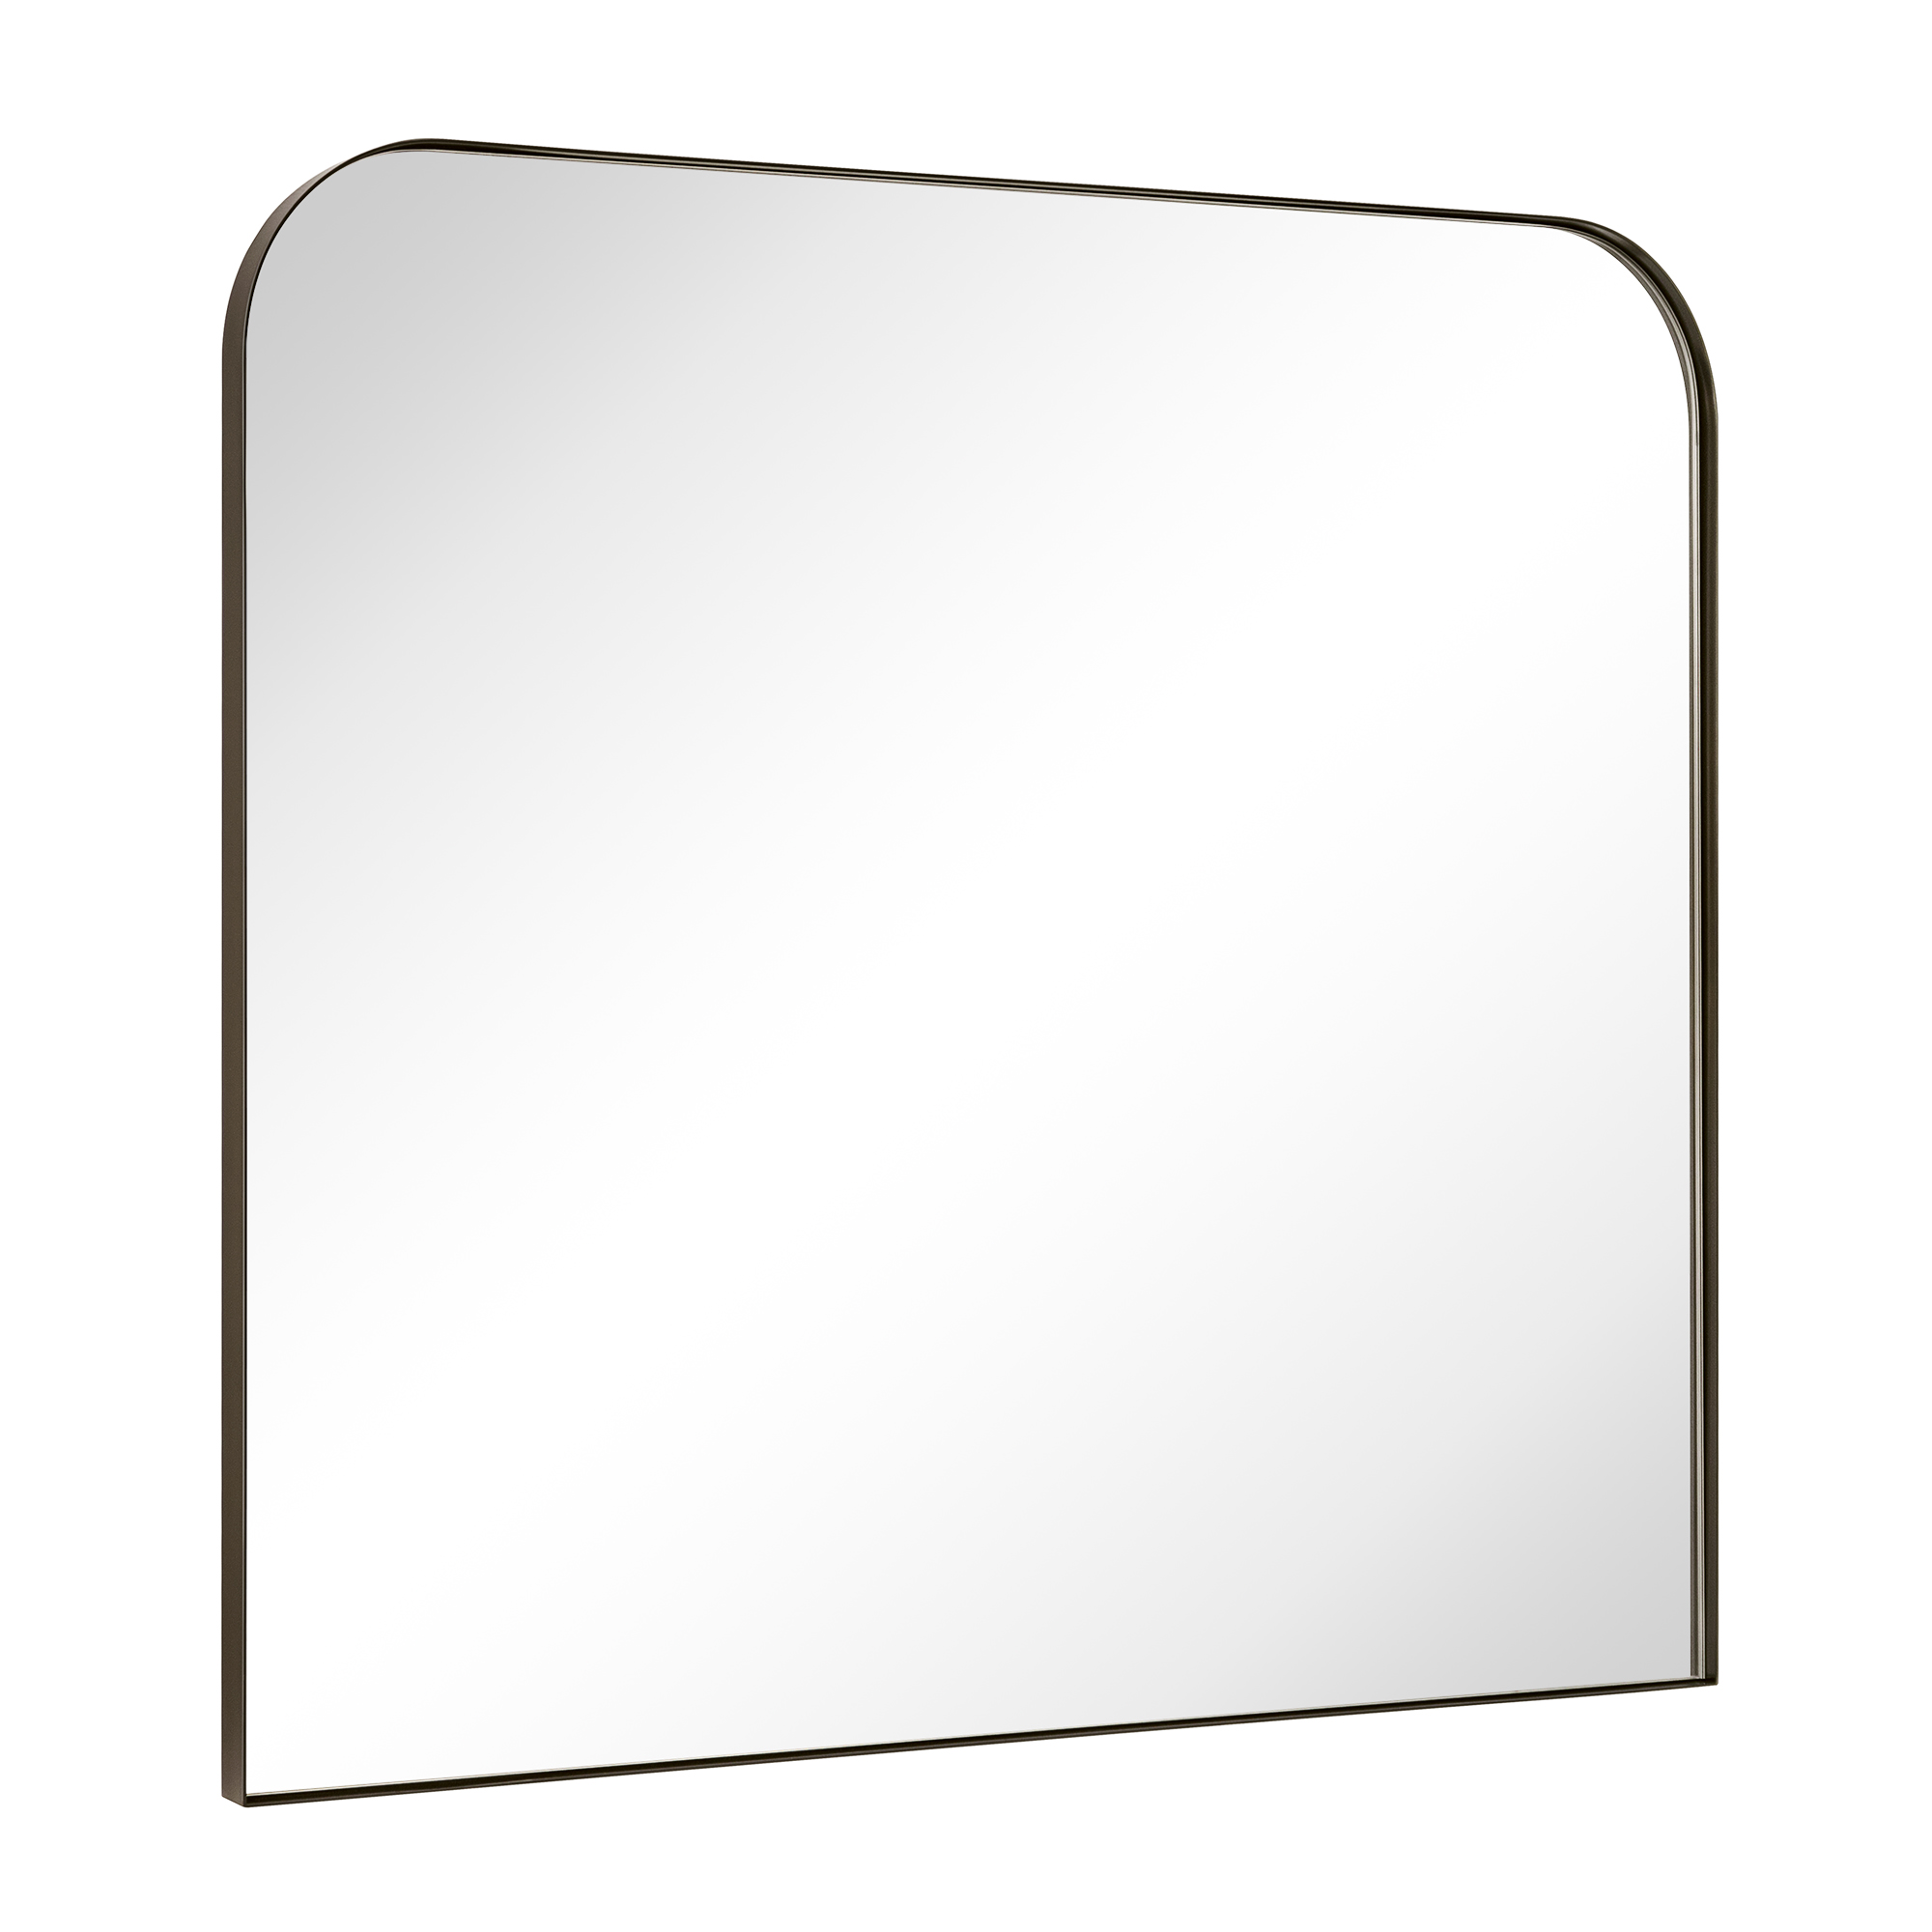 Decole Arch Metal Wall Mirror-30x34-Oil Rubbed Bronze